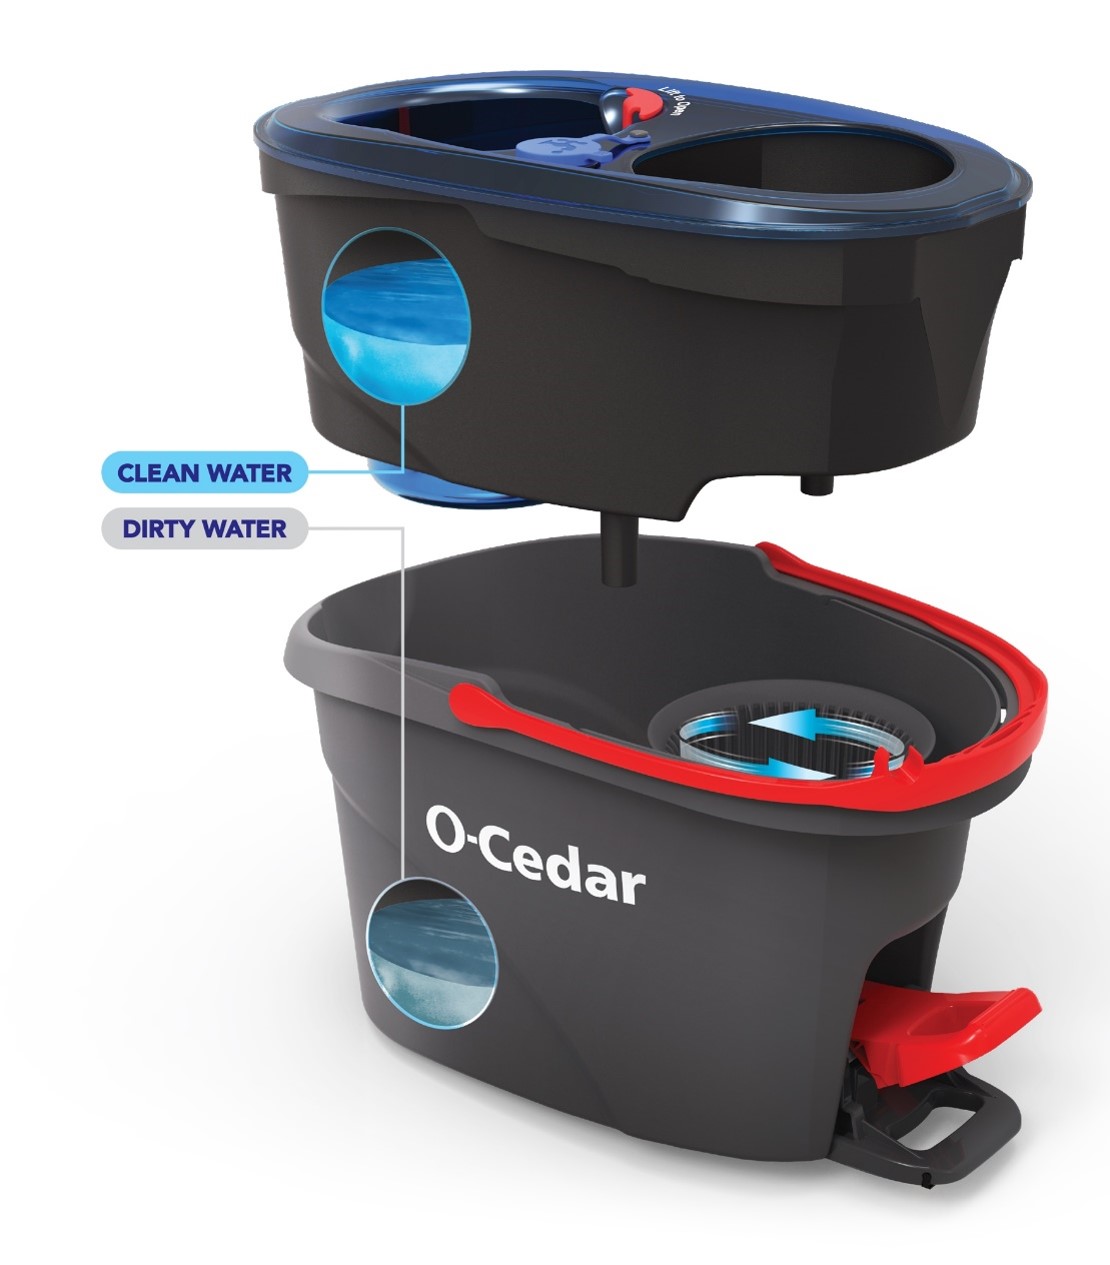 O-Cedar EasyWring RinseClean Spin Mop and Bucket System, Hands-Free System - image 9 of 25